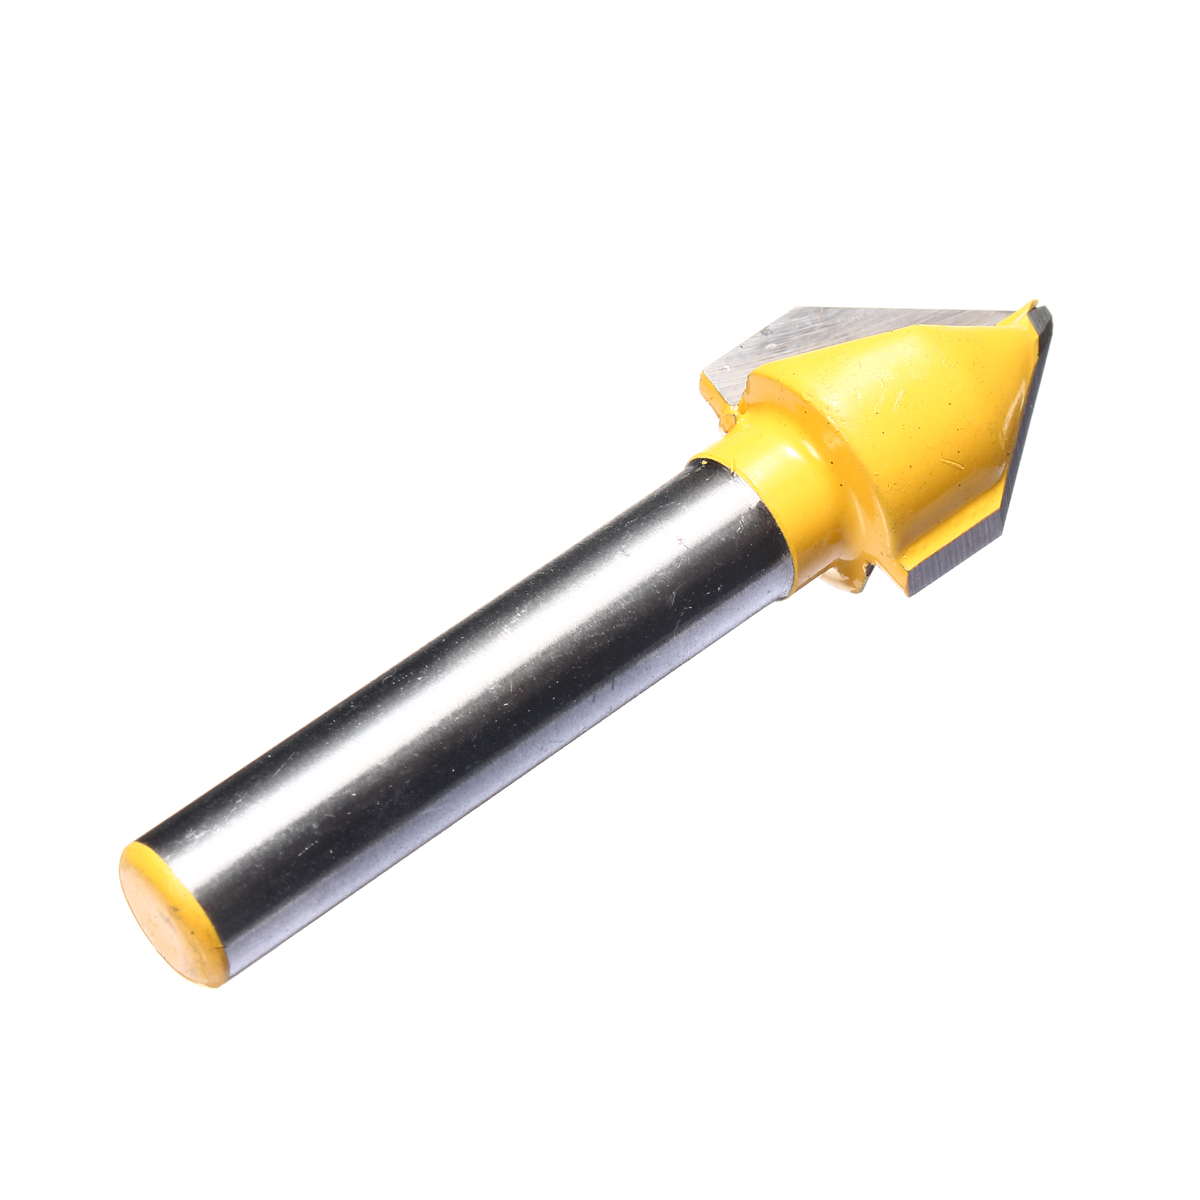 14-Inch-Shank-60-Degree-V-Groove-Router-Bit-Carbide-Tipped-Hardwood-Cutting-Cutter-1291376